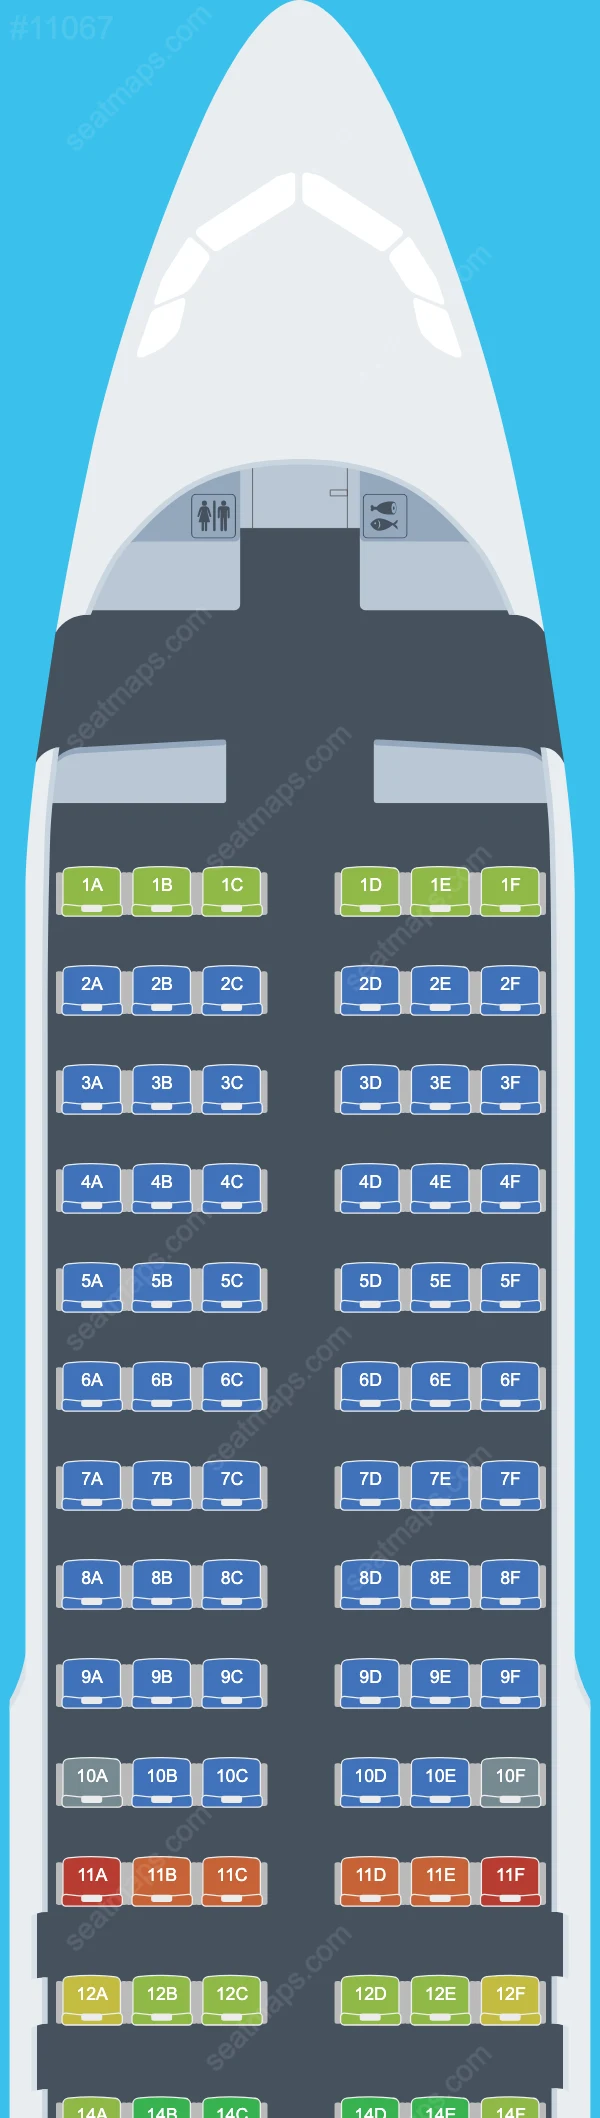 MYAirline Airbus A320 Seat Maps A320-200